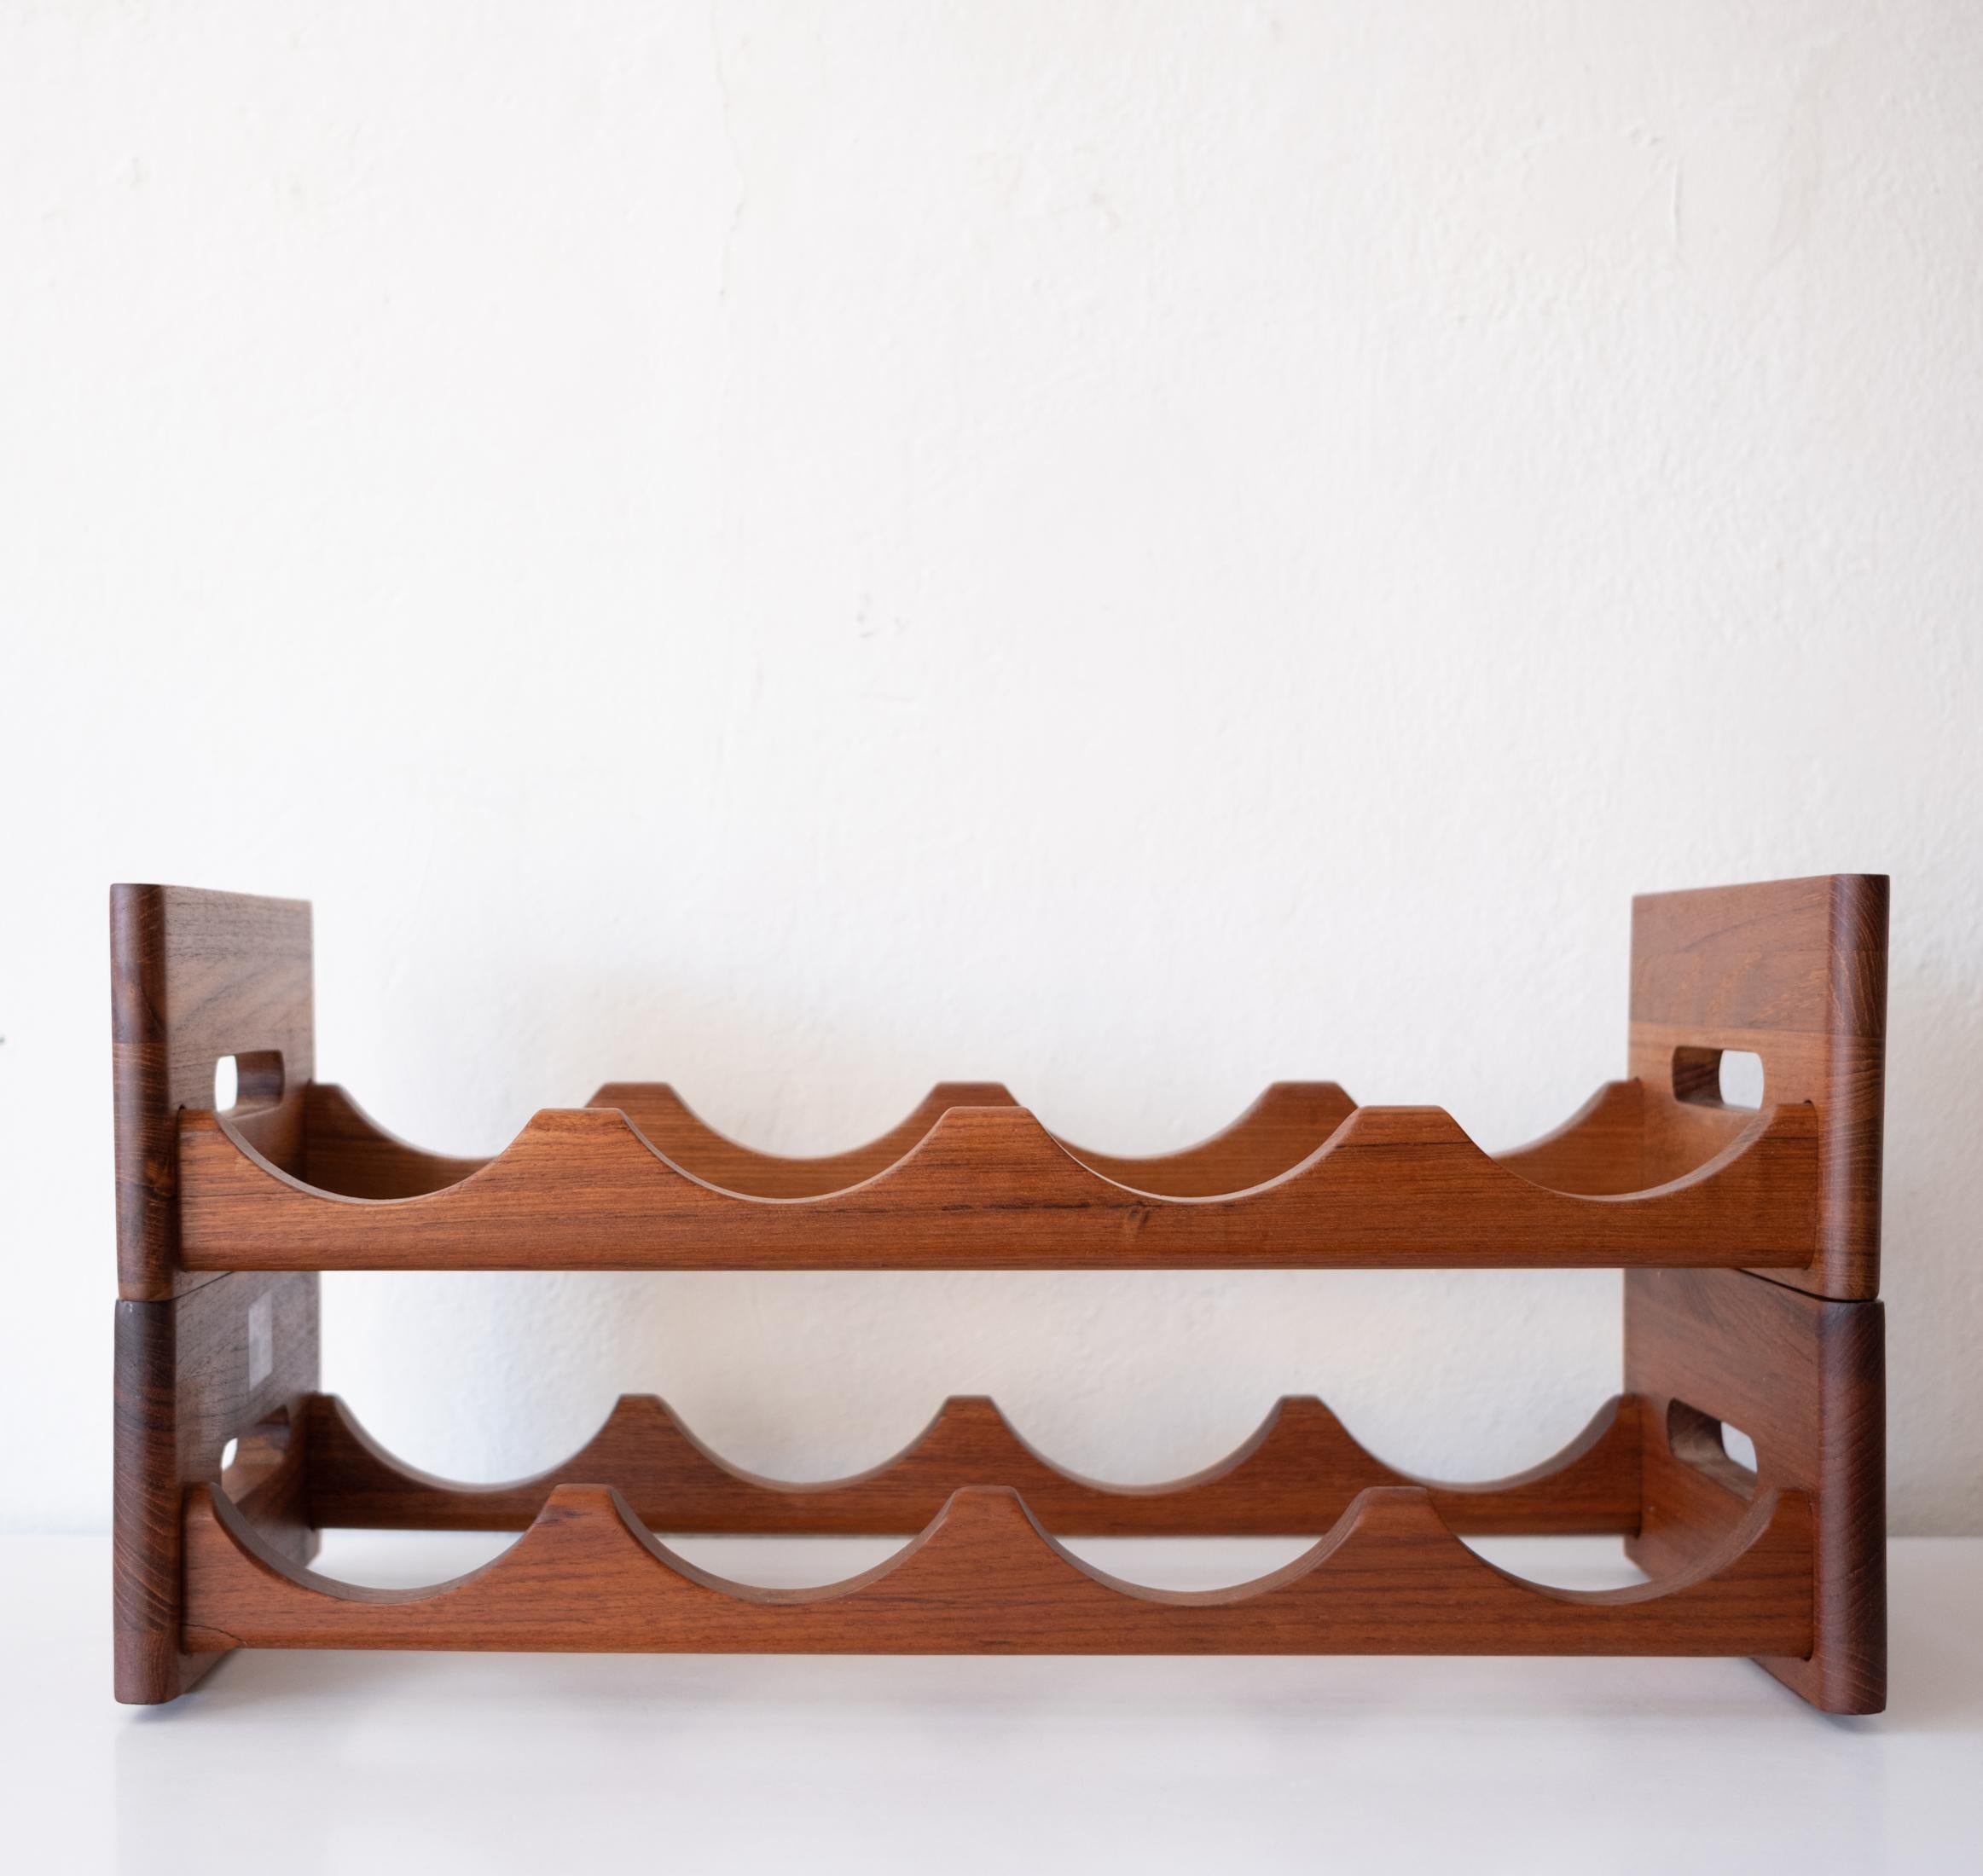 A pair of Kalmar solid teak wine bottle racks. They appear to have never been used and include the original label. Kalmar was Danish company which produced items in Thailand and Denmark. 

Each rack holds four bottles and measures 9